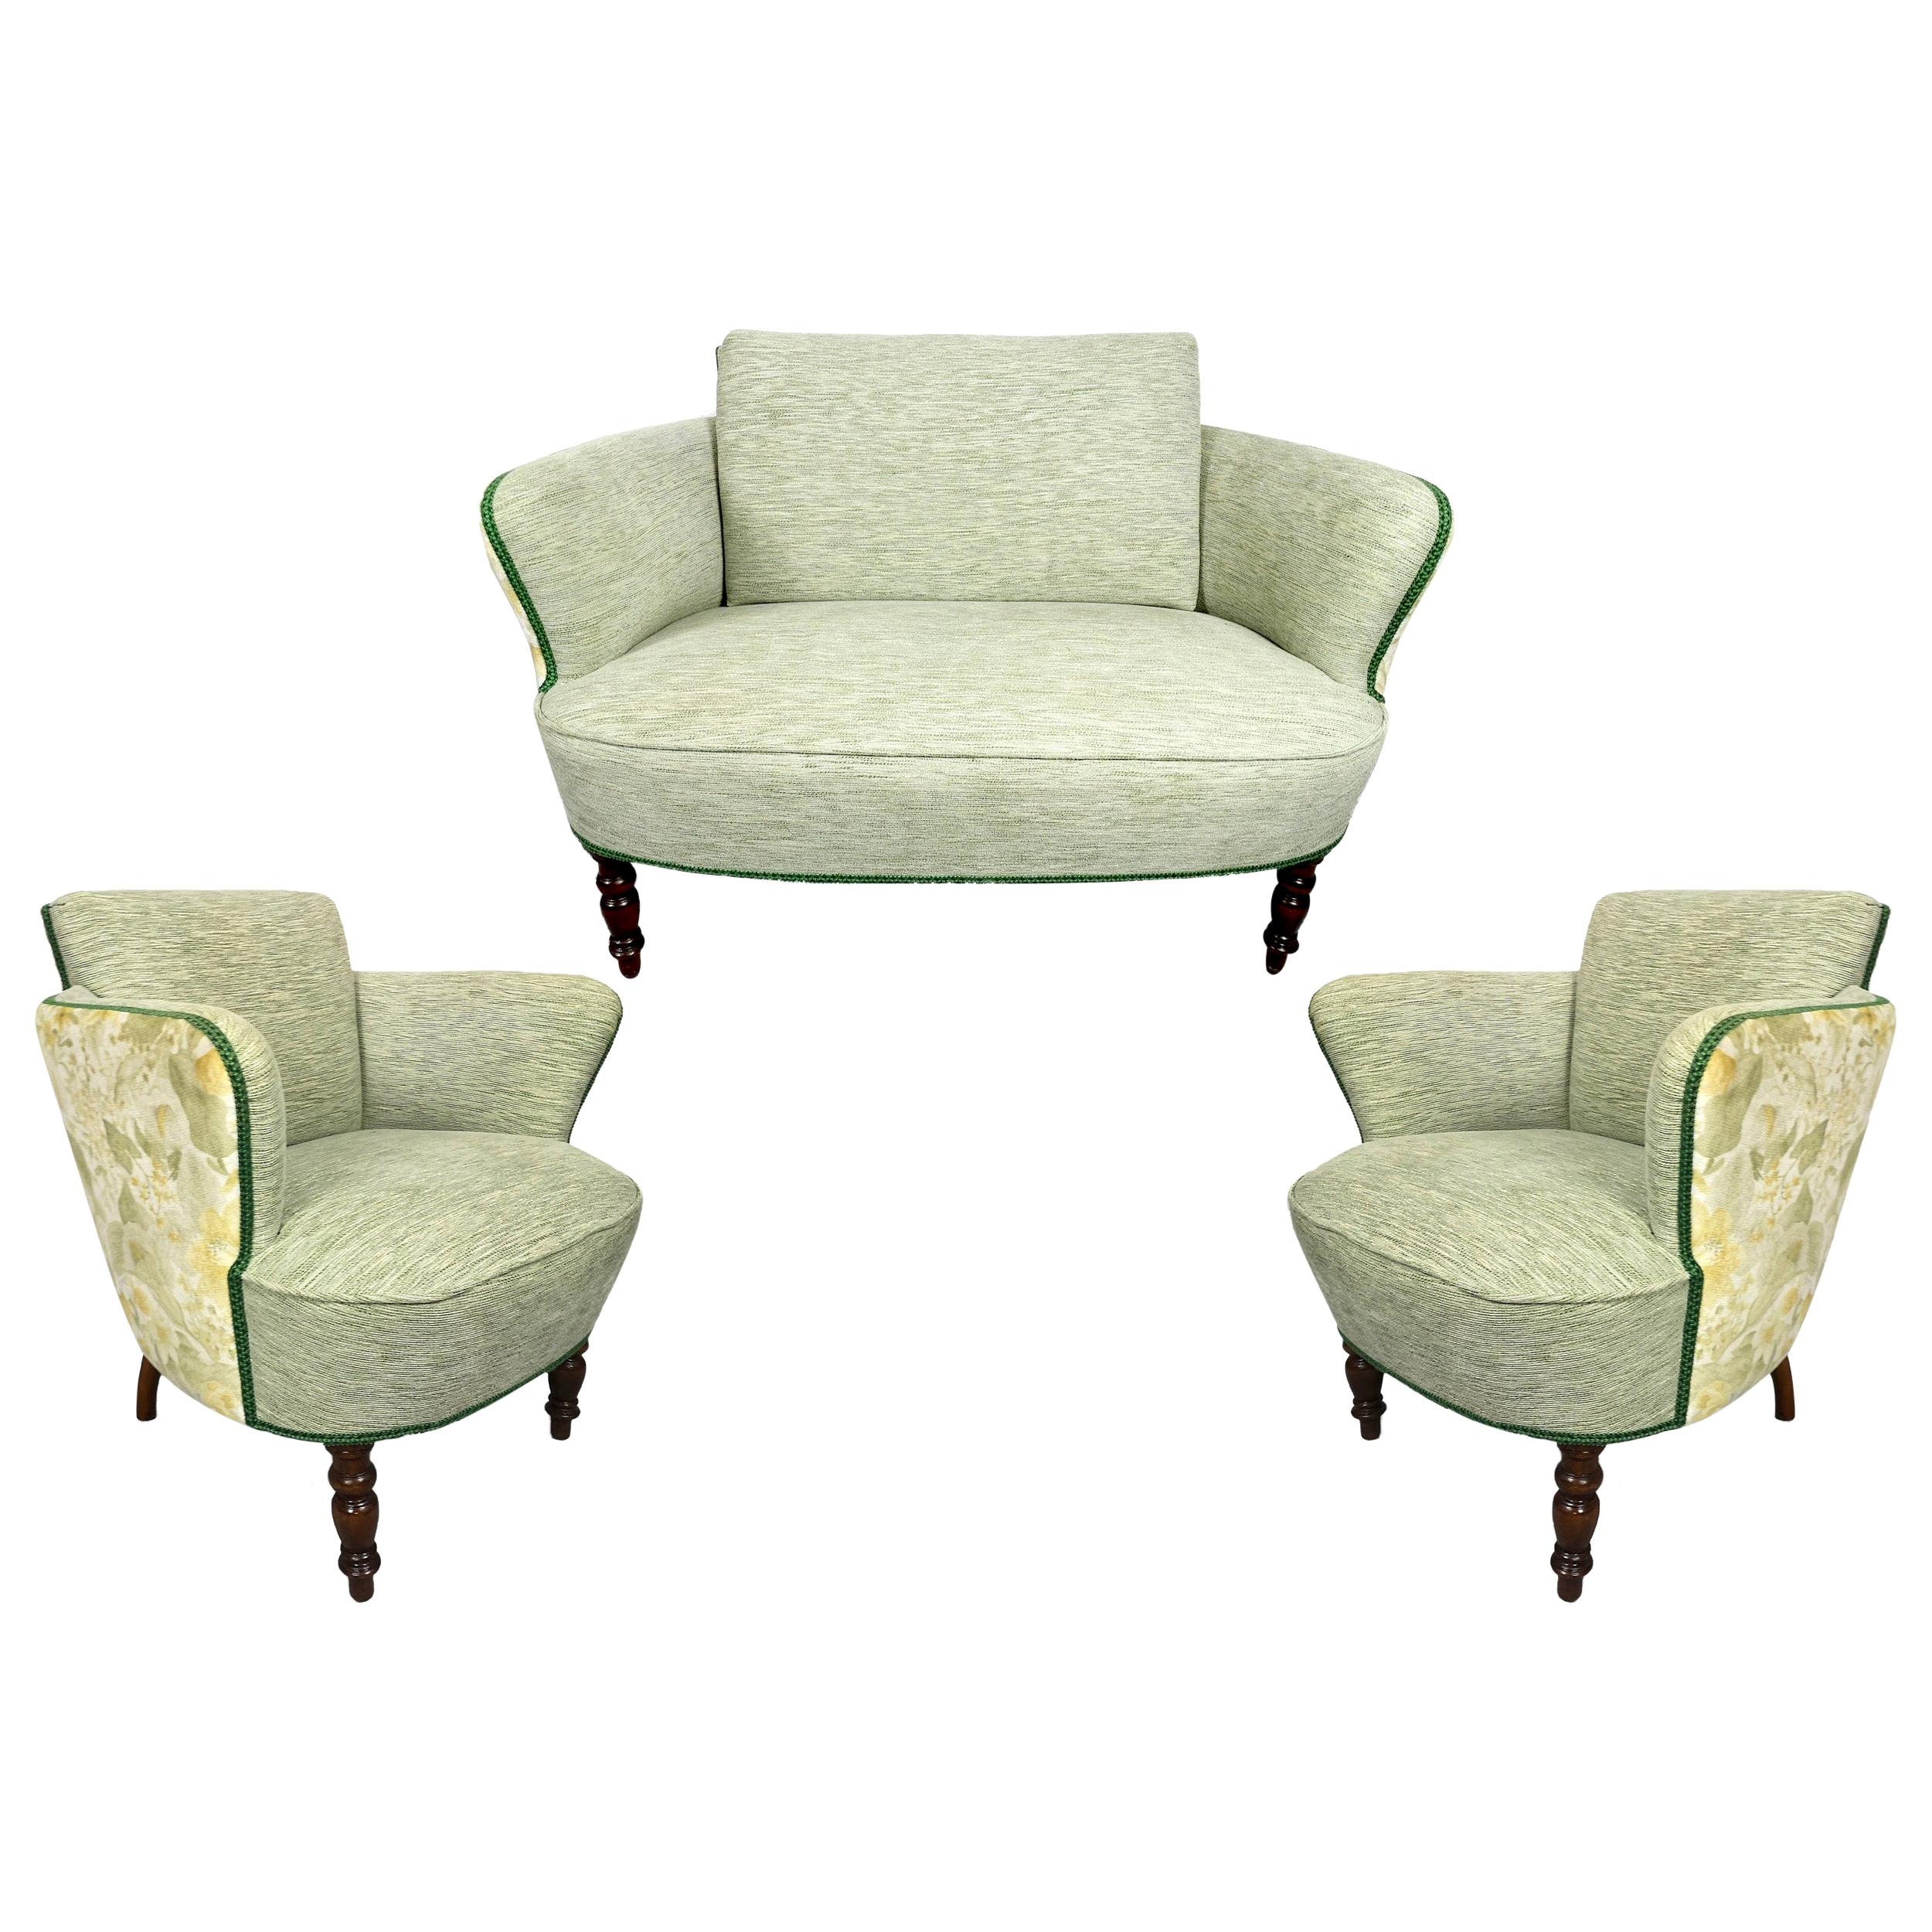 Living Room Set with Setee and Two Armchairs, 1920s-1930s For Sale